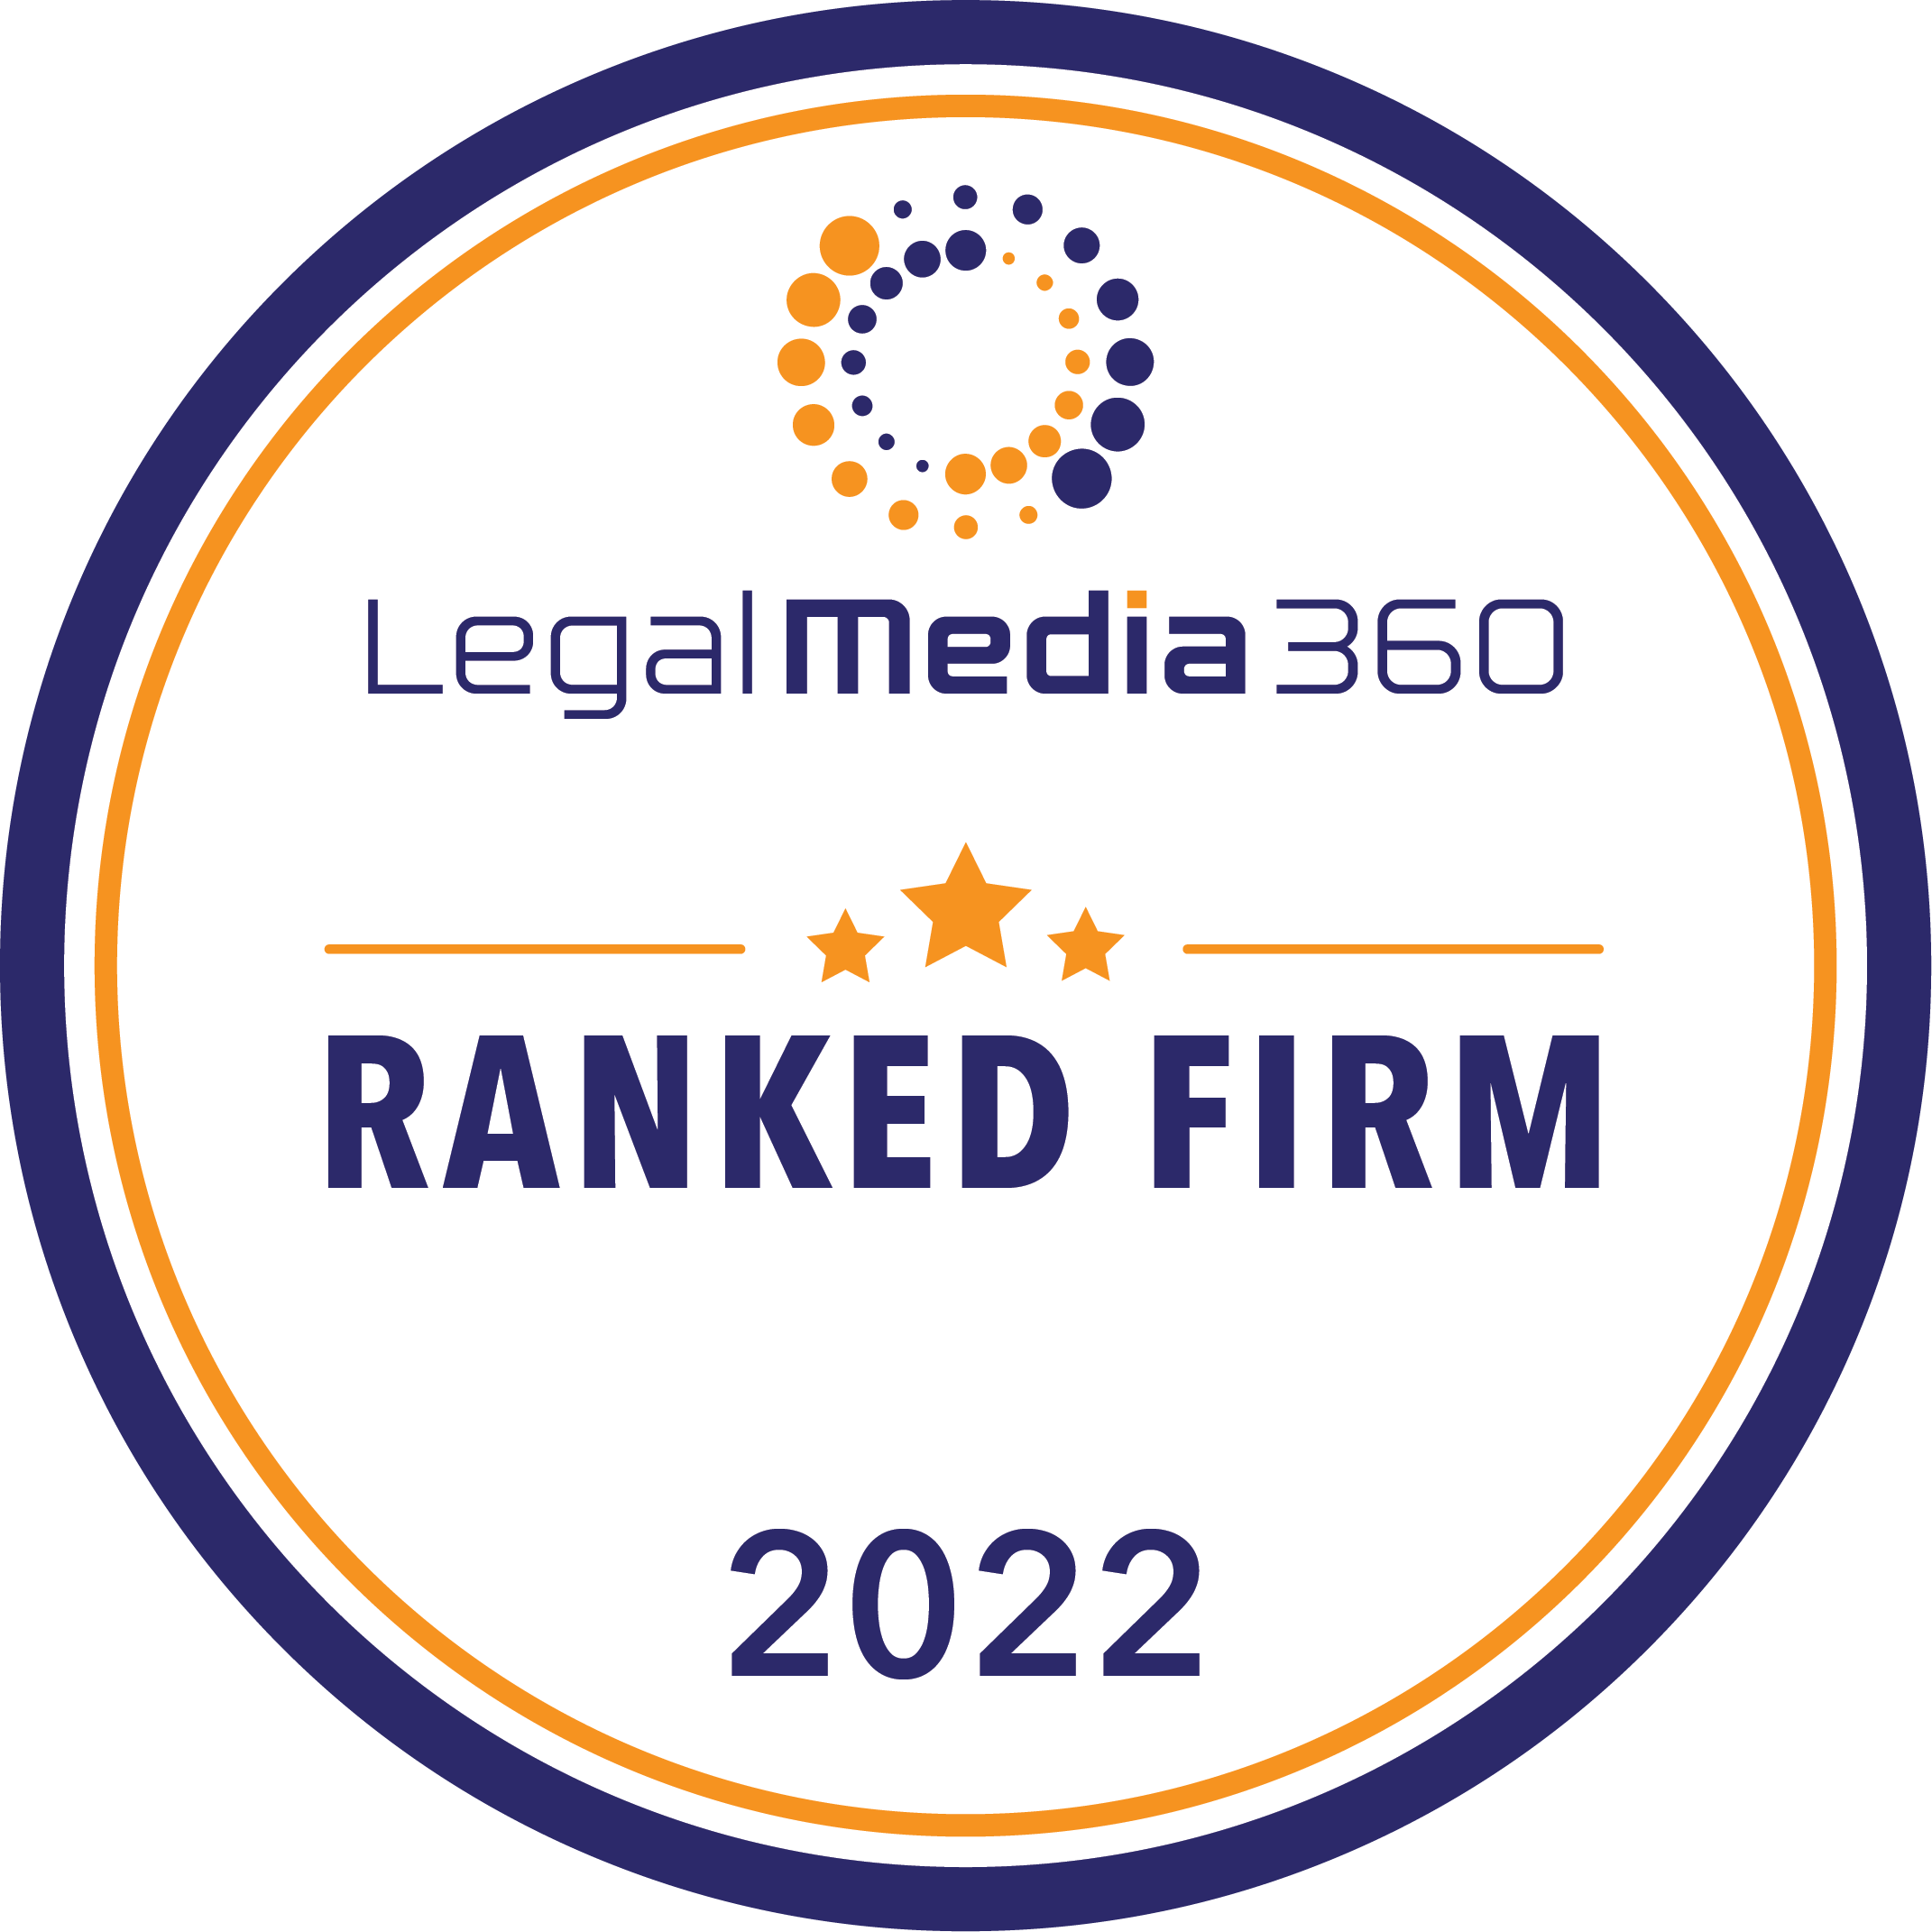 Ranked as a Hong Kong Domestic: Specialist by Legal Media 360, 2022 edition